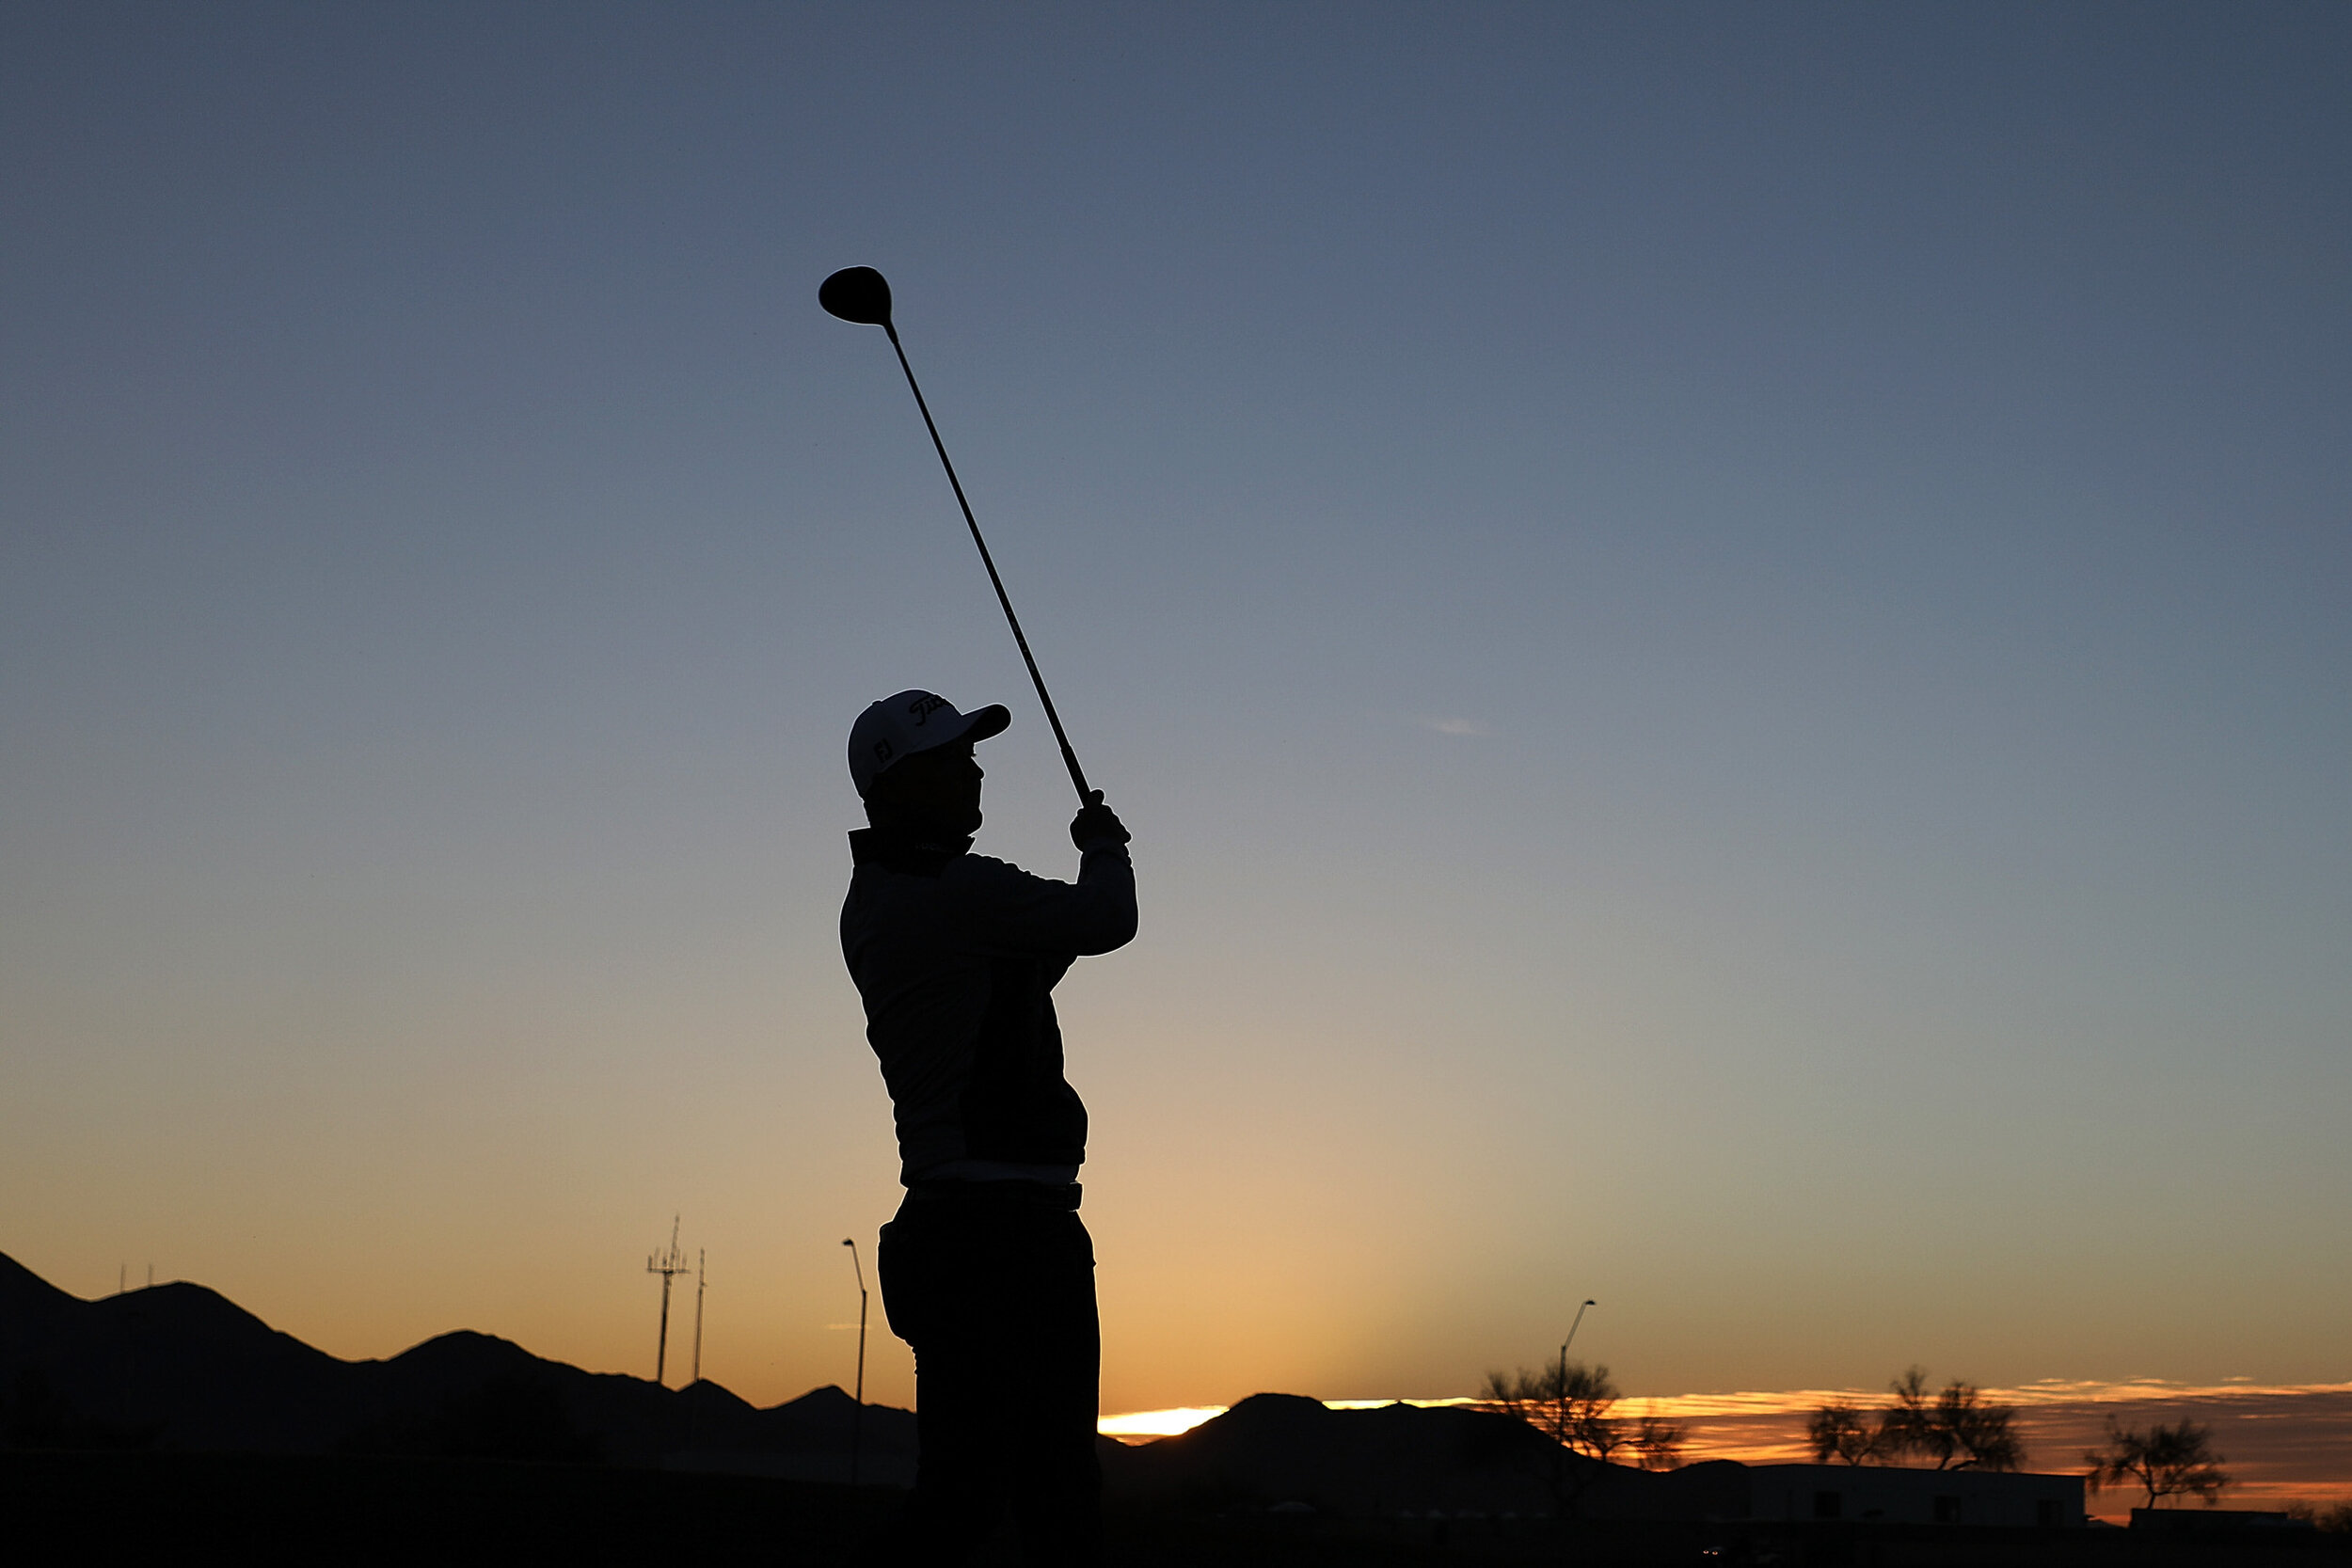  SCOTTSDALE, ARIZONA - FEBRUARY 04: Matt Jones of Australia hits his tee shot on the 10th hole during the first round of the Waste Management Phoenix Open at TPC Scottsdale on February 04, 2021 in Scottsdale, Arizona. (Photo by Christian Petersen/Get